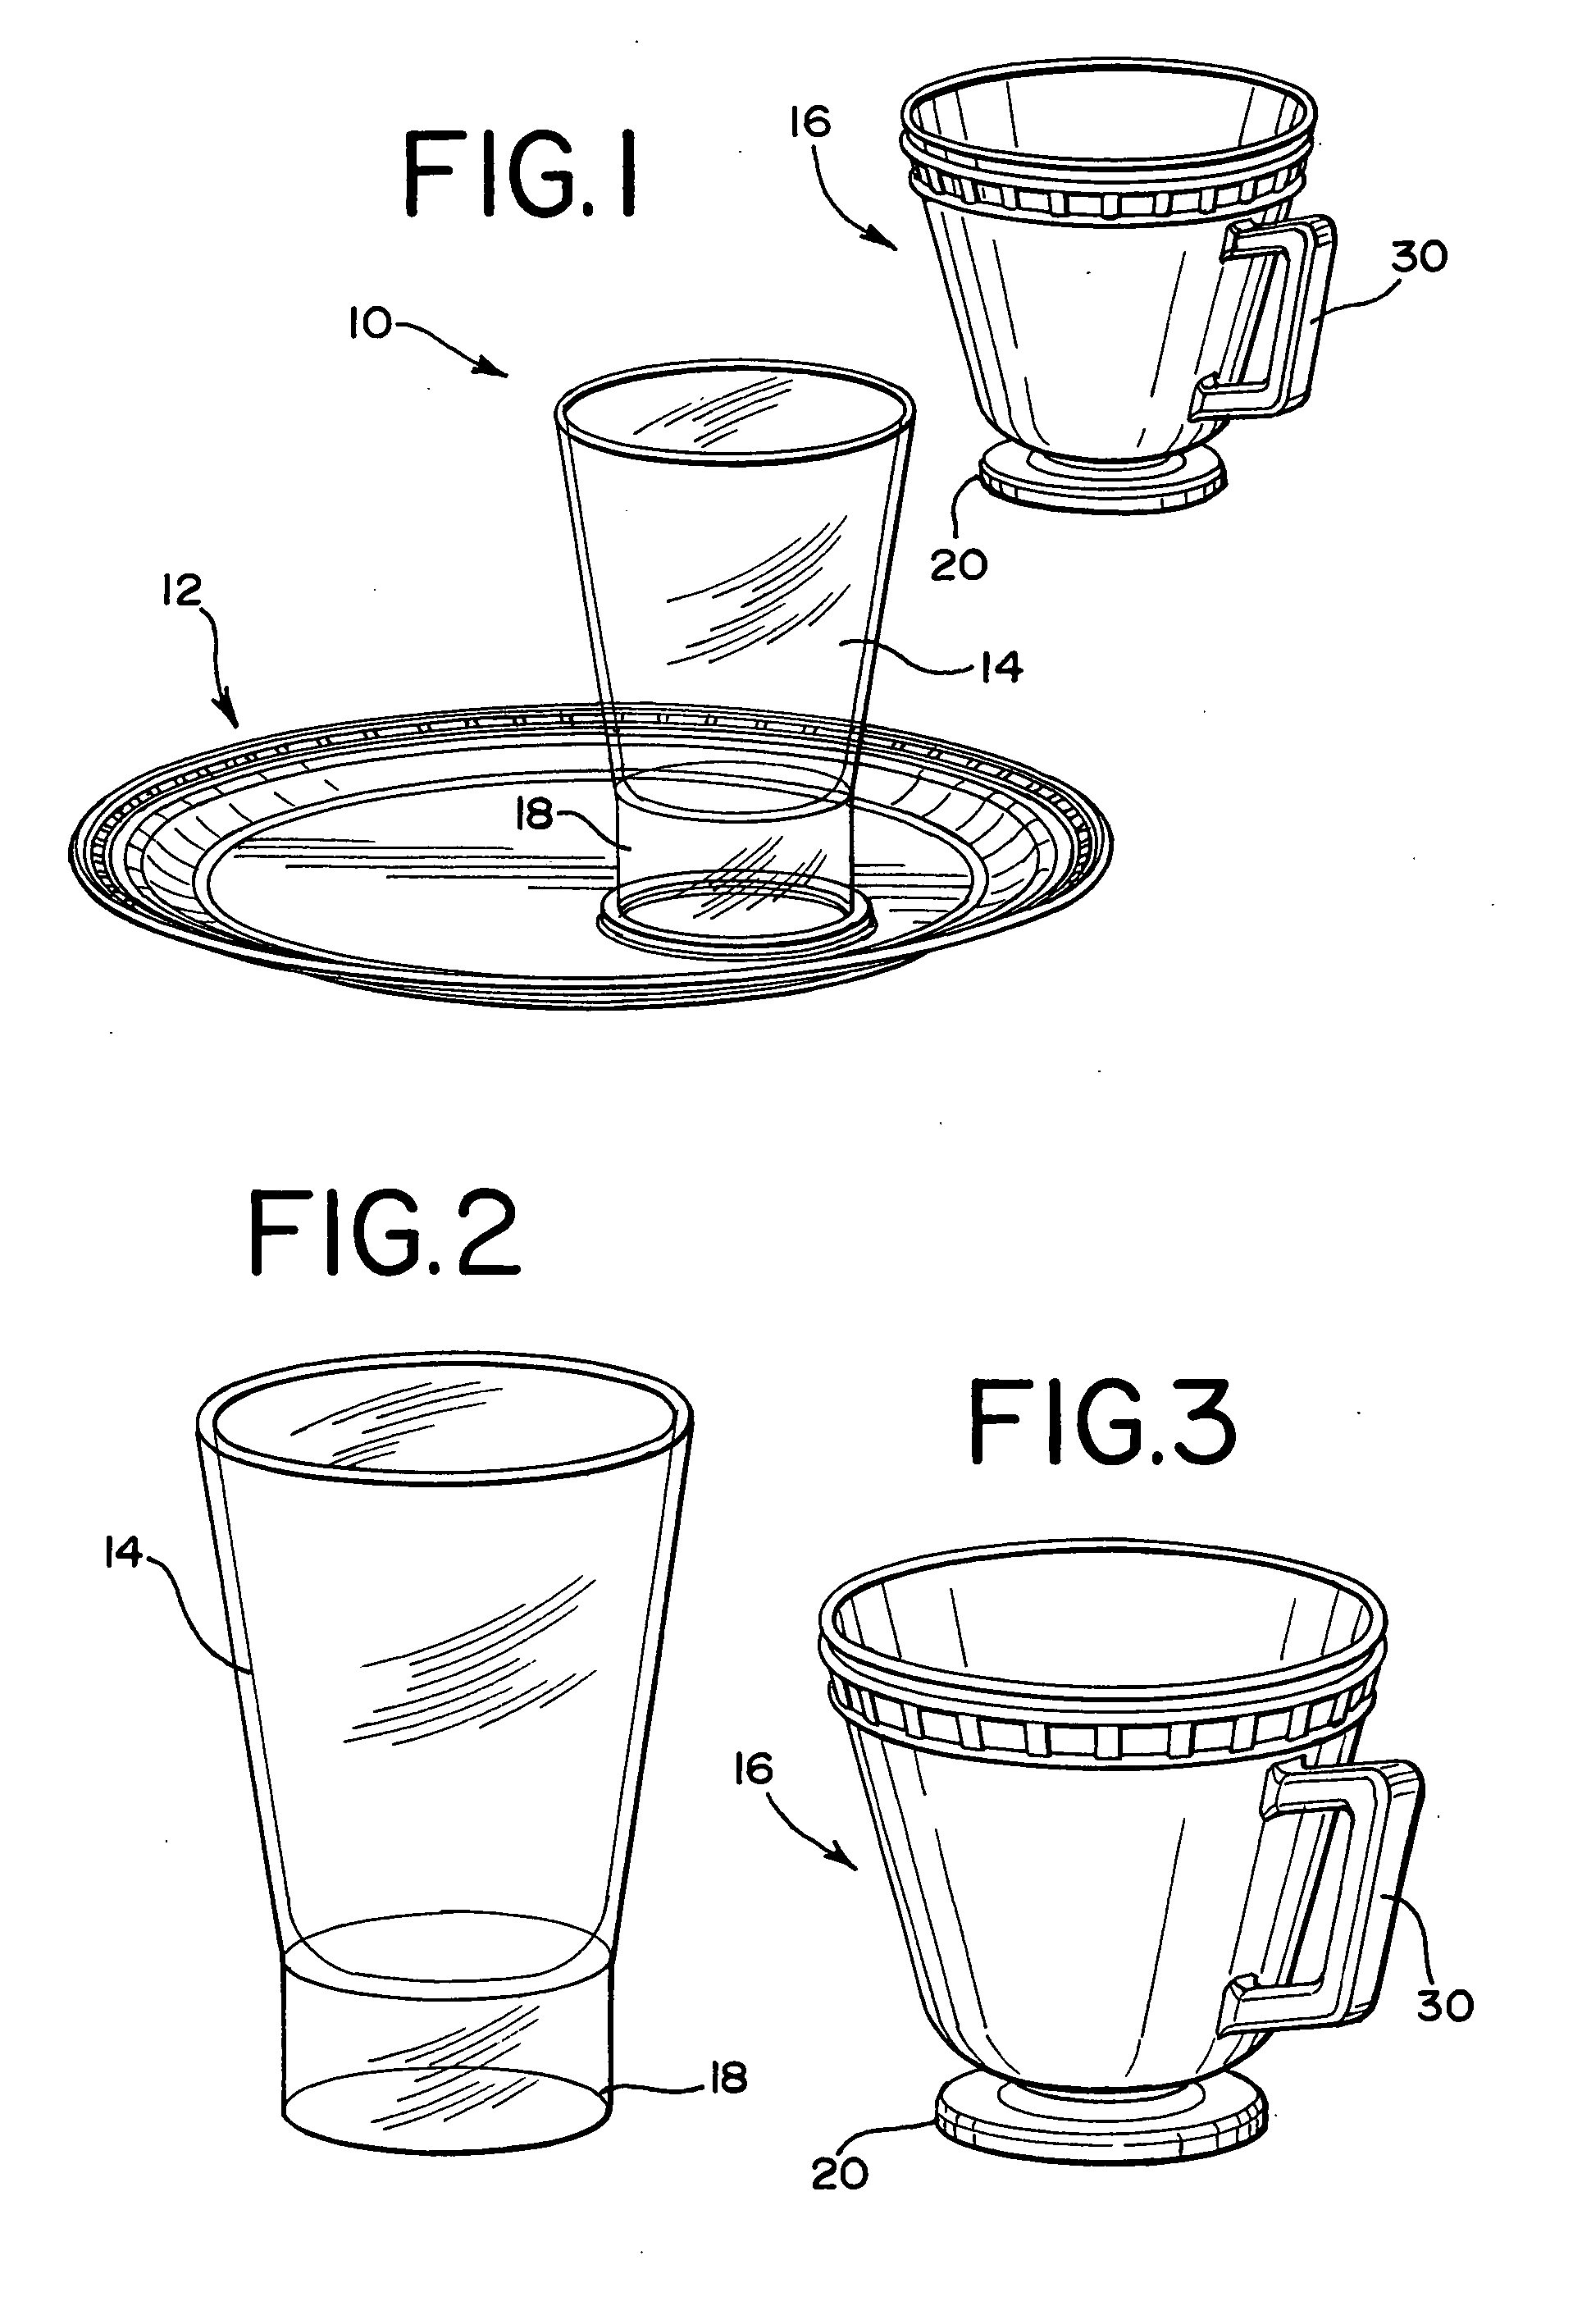 Combination food plate with cavity, for securing cup and glass with complementary bases, within cavity